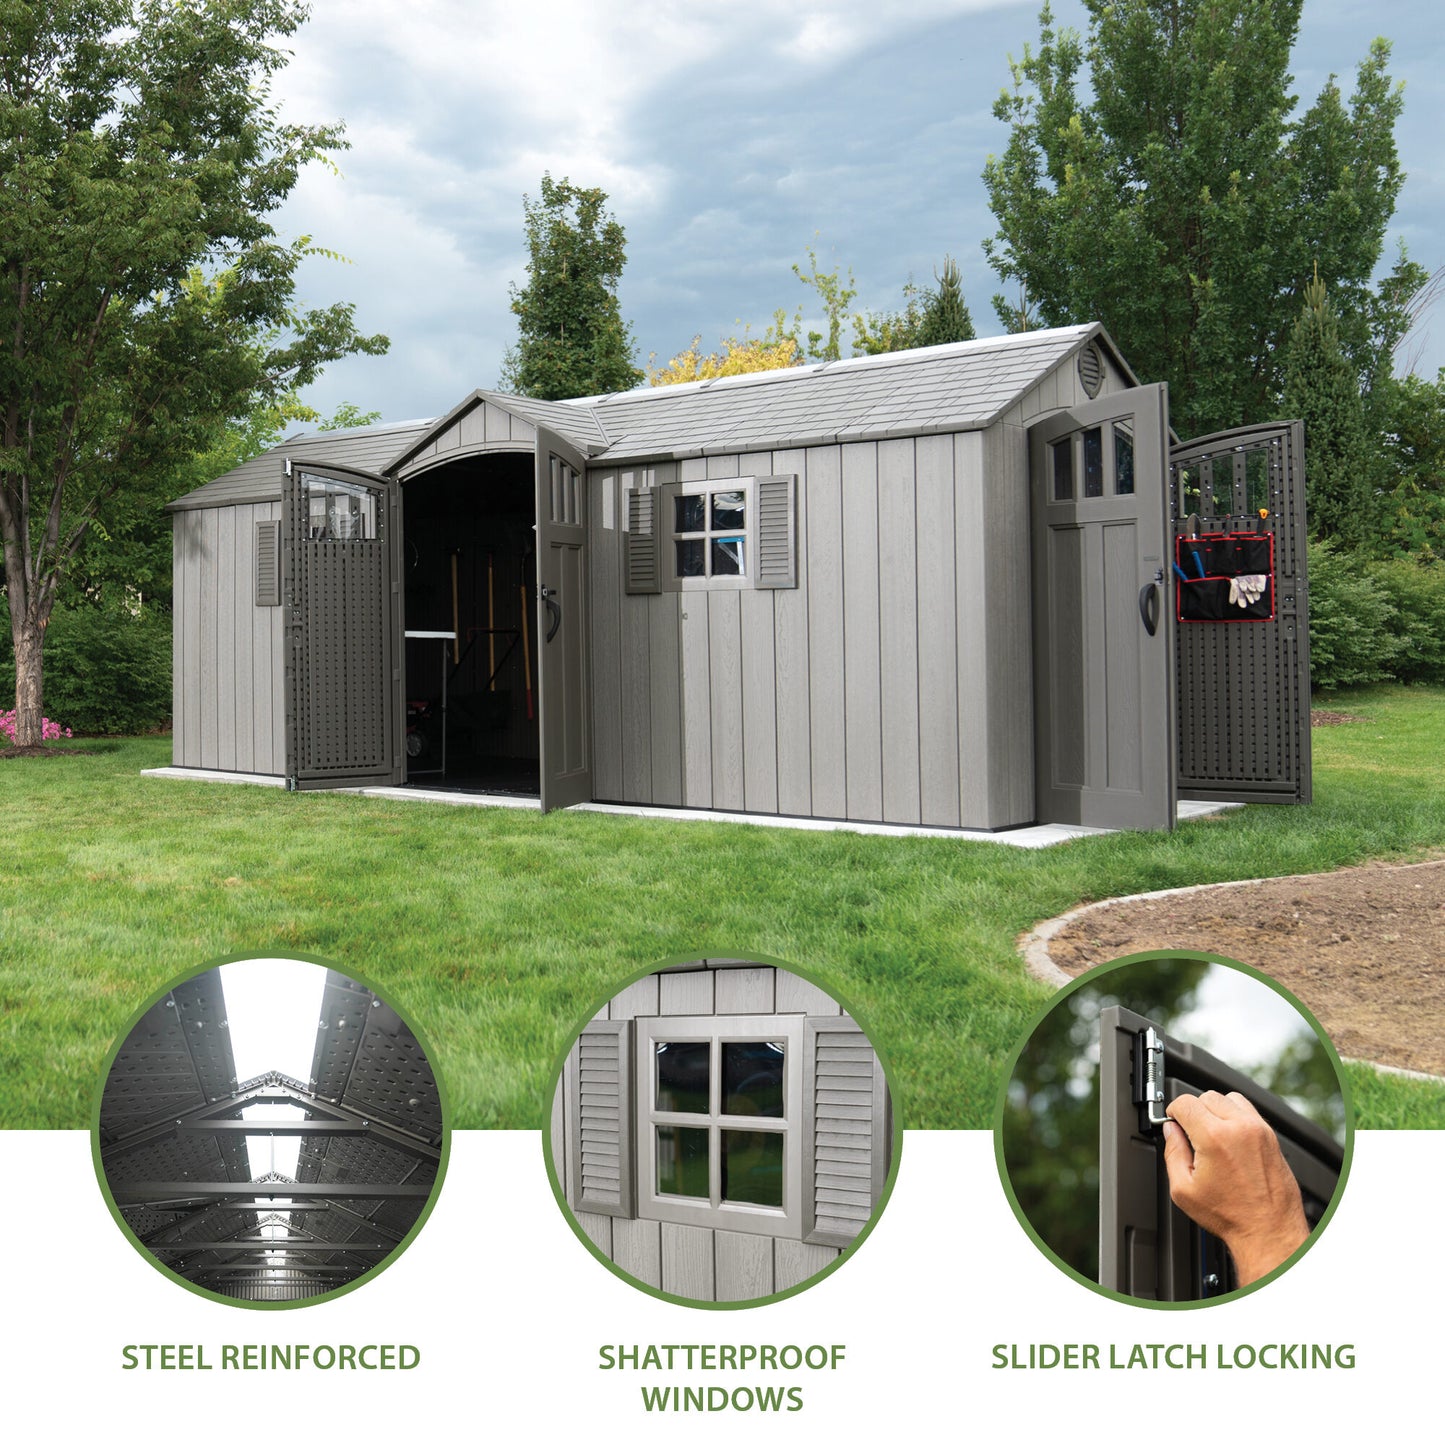 Lifetime 20 Ft. x 8 Ft. Outdoor Storage Shed DUAL ENTRY & ROUGHCUT EDITION (60351)